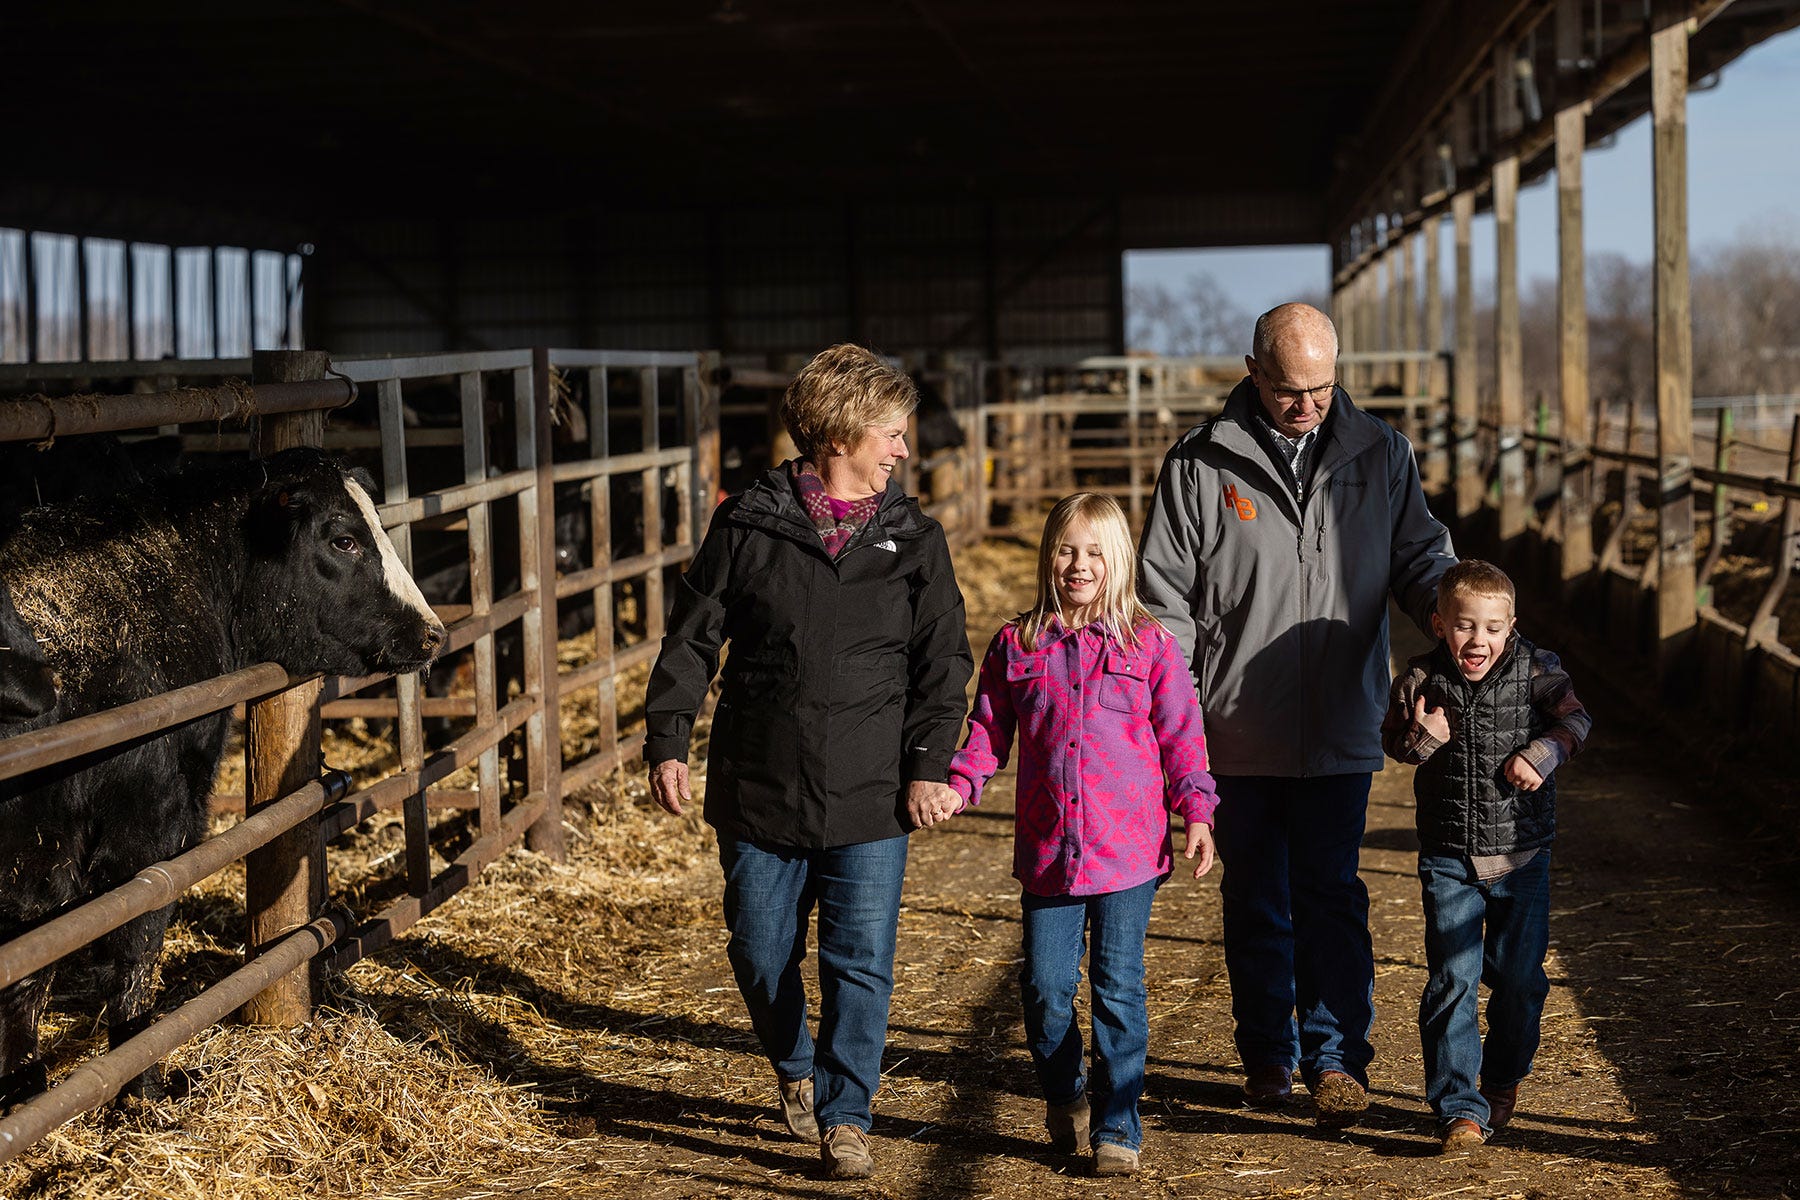 Malcolm and Susan Head and two grandkids walk through a cattle barn